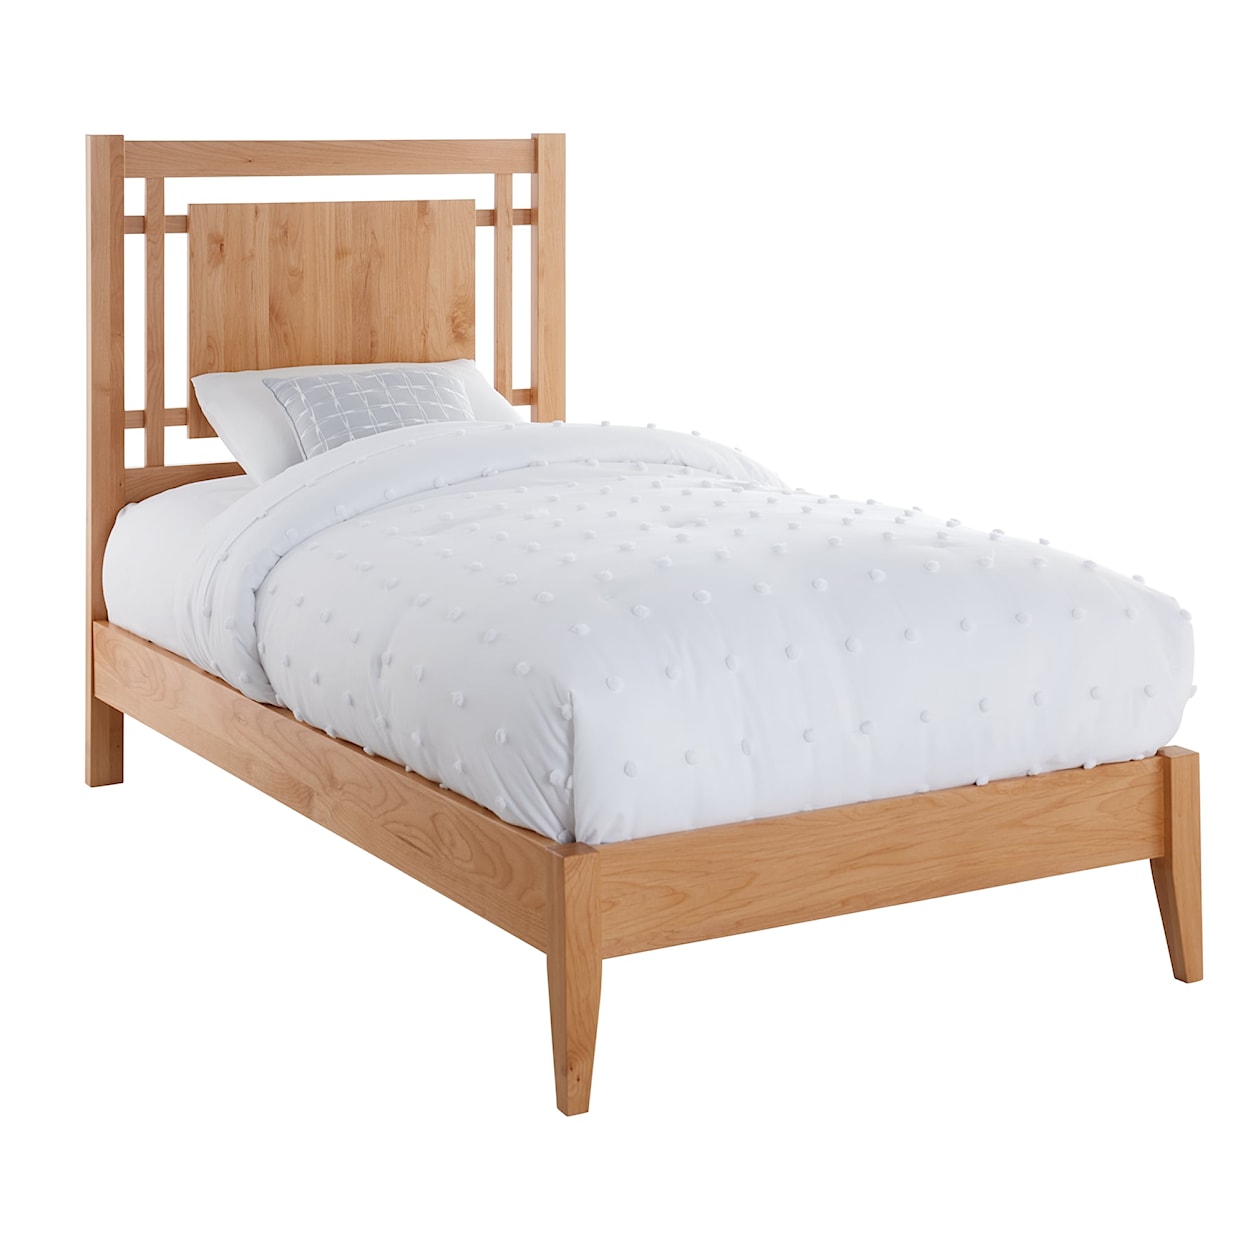 Archbold Furniture 2 West Generations Twin Open Panel Platform Bed